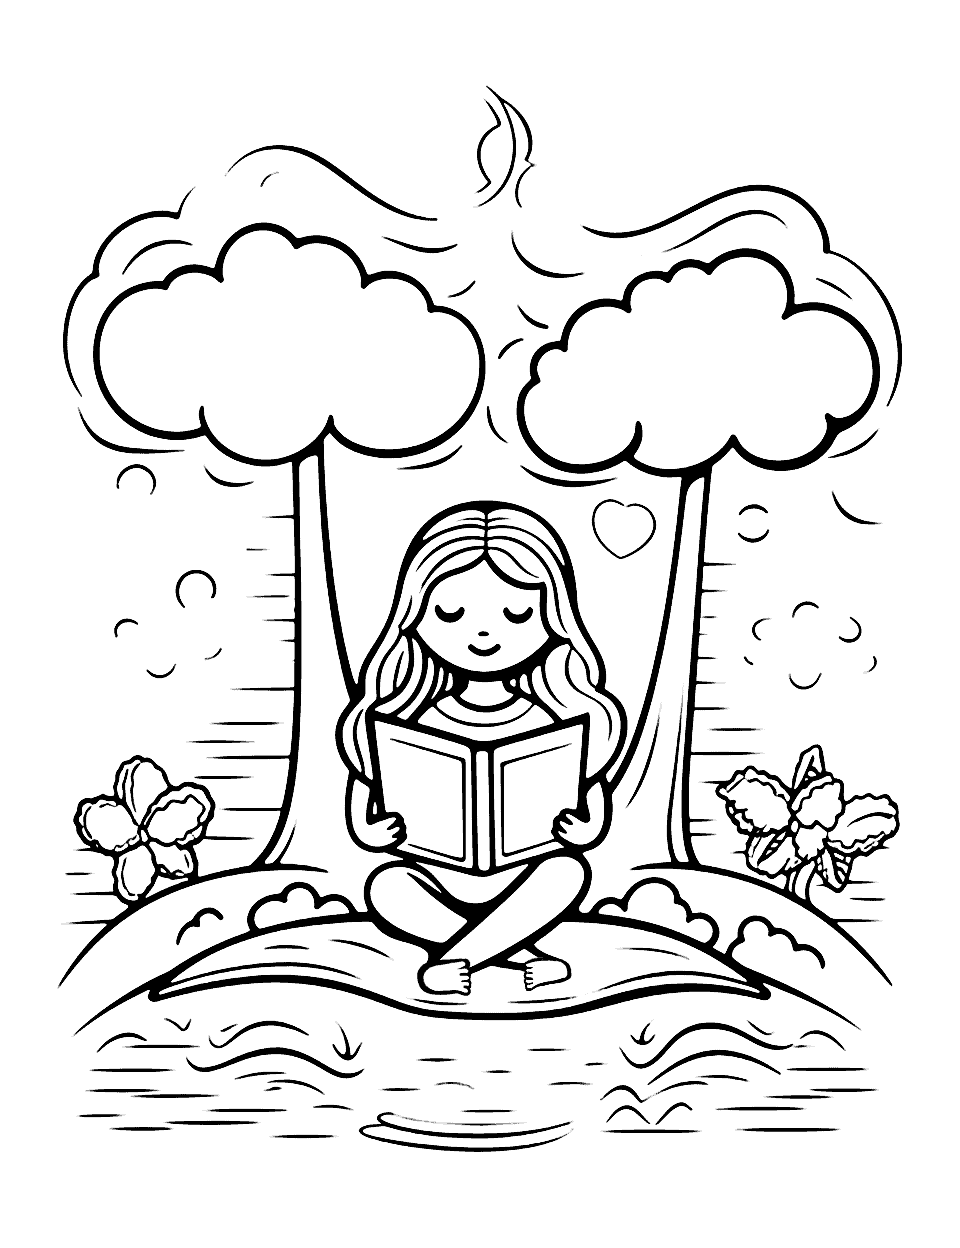 55 Summer Reading Coloring Pages 44